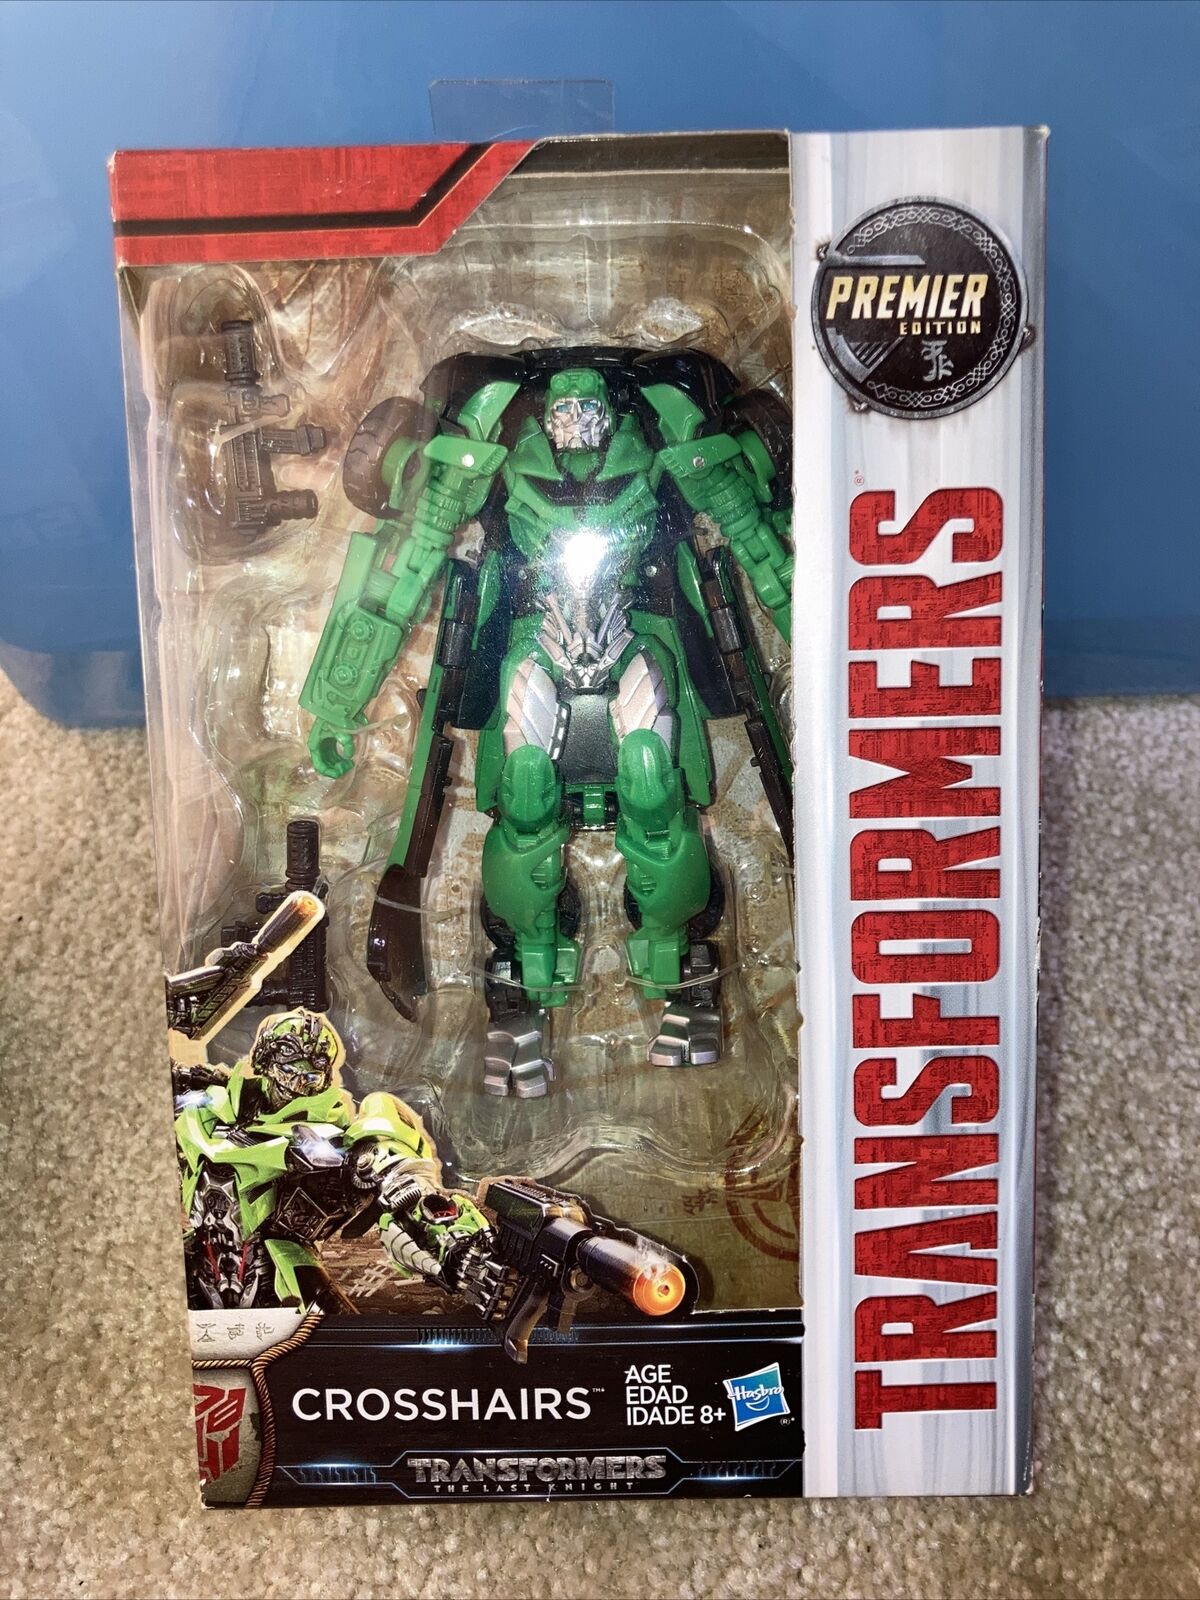 Transformers The Last Knight Crosshairs Premier Edition Deluxe Class Hasbro Toys